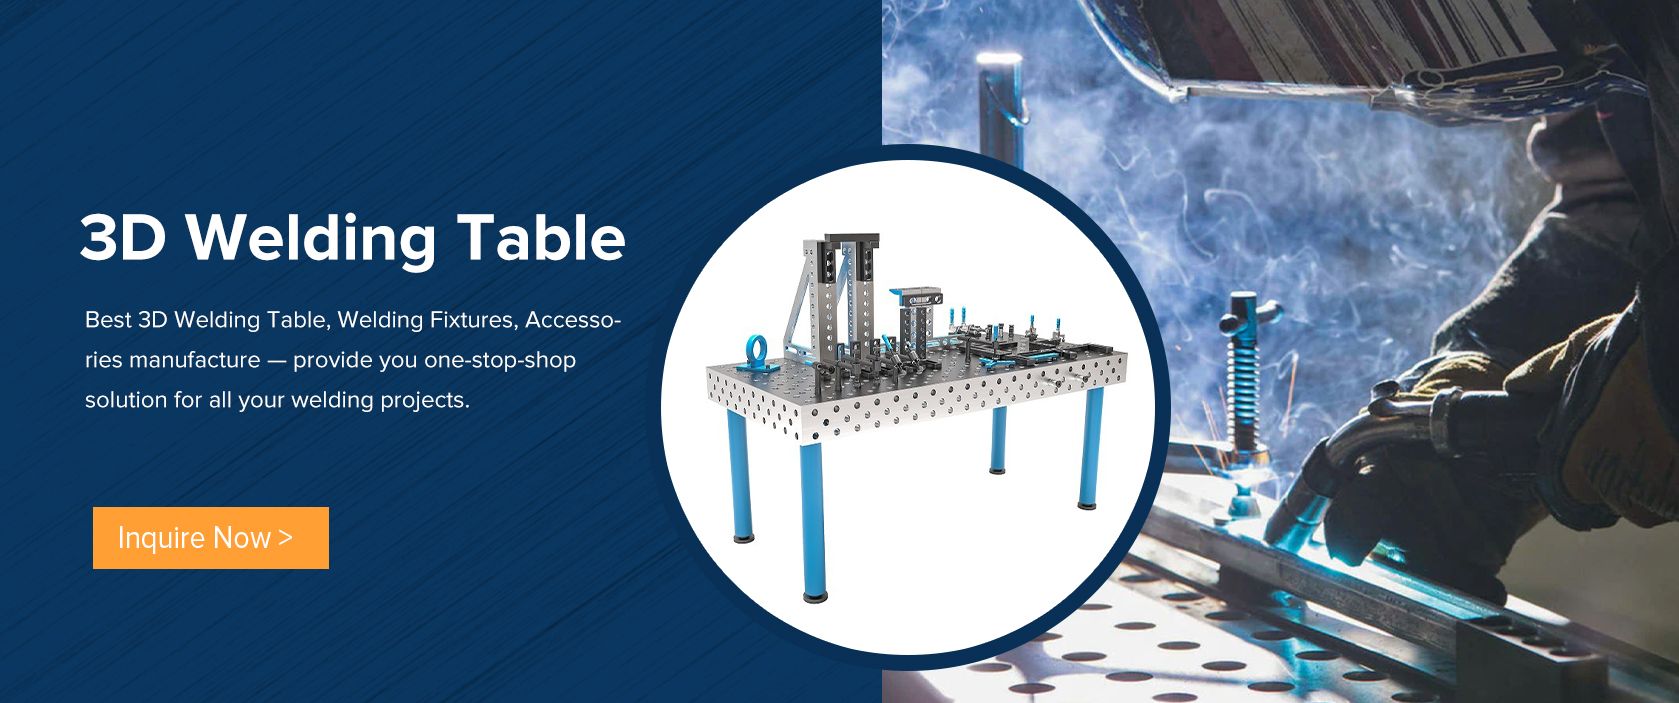 Best 3D Welding Table, Welding Fixtures, Accessories manufacture — provide you one-stop-shop solution for all your welding projects.